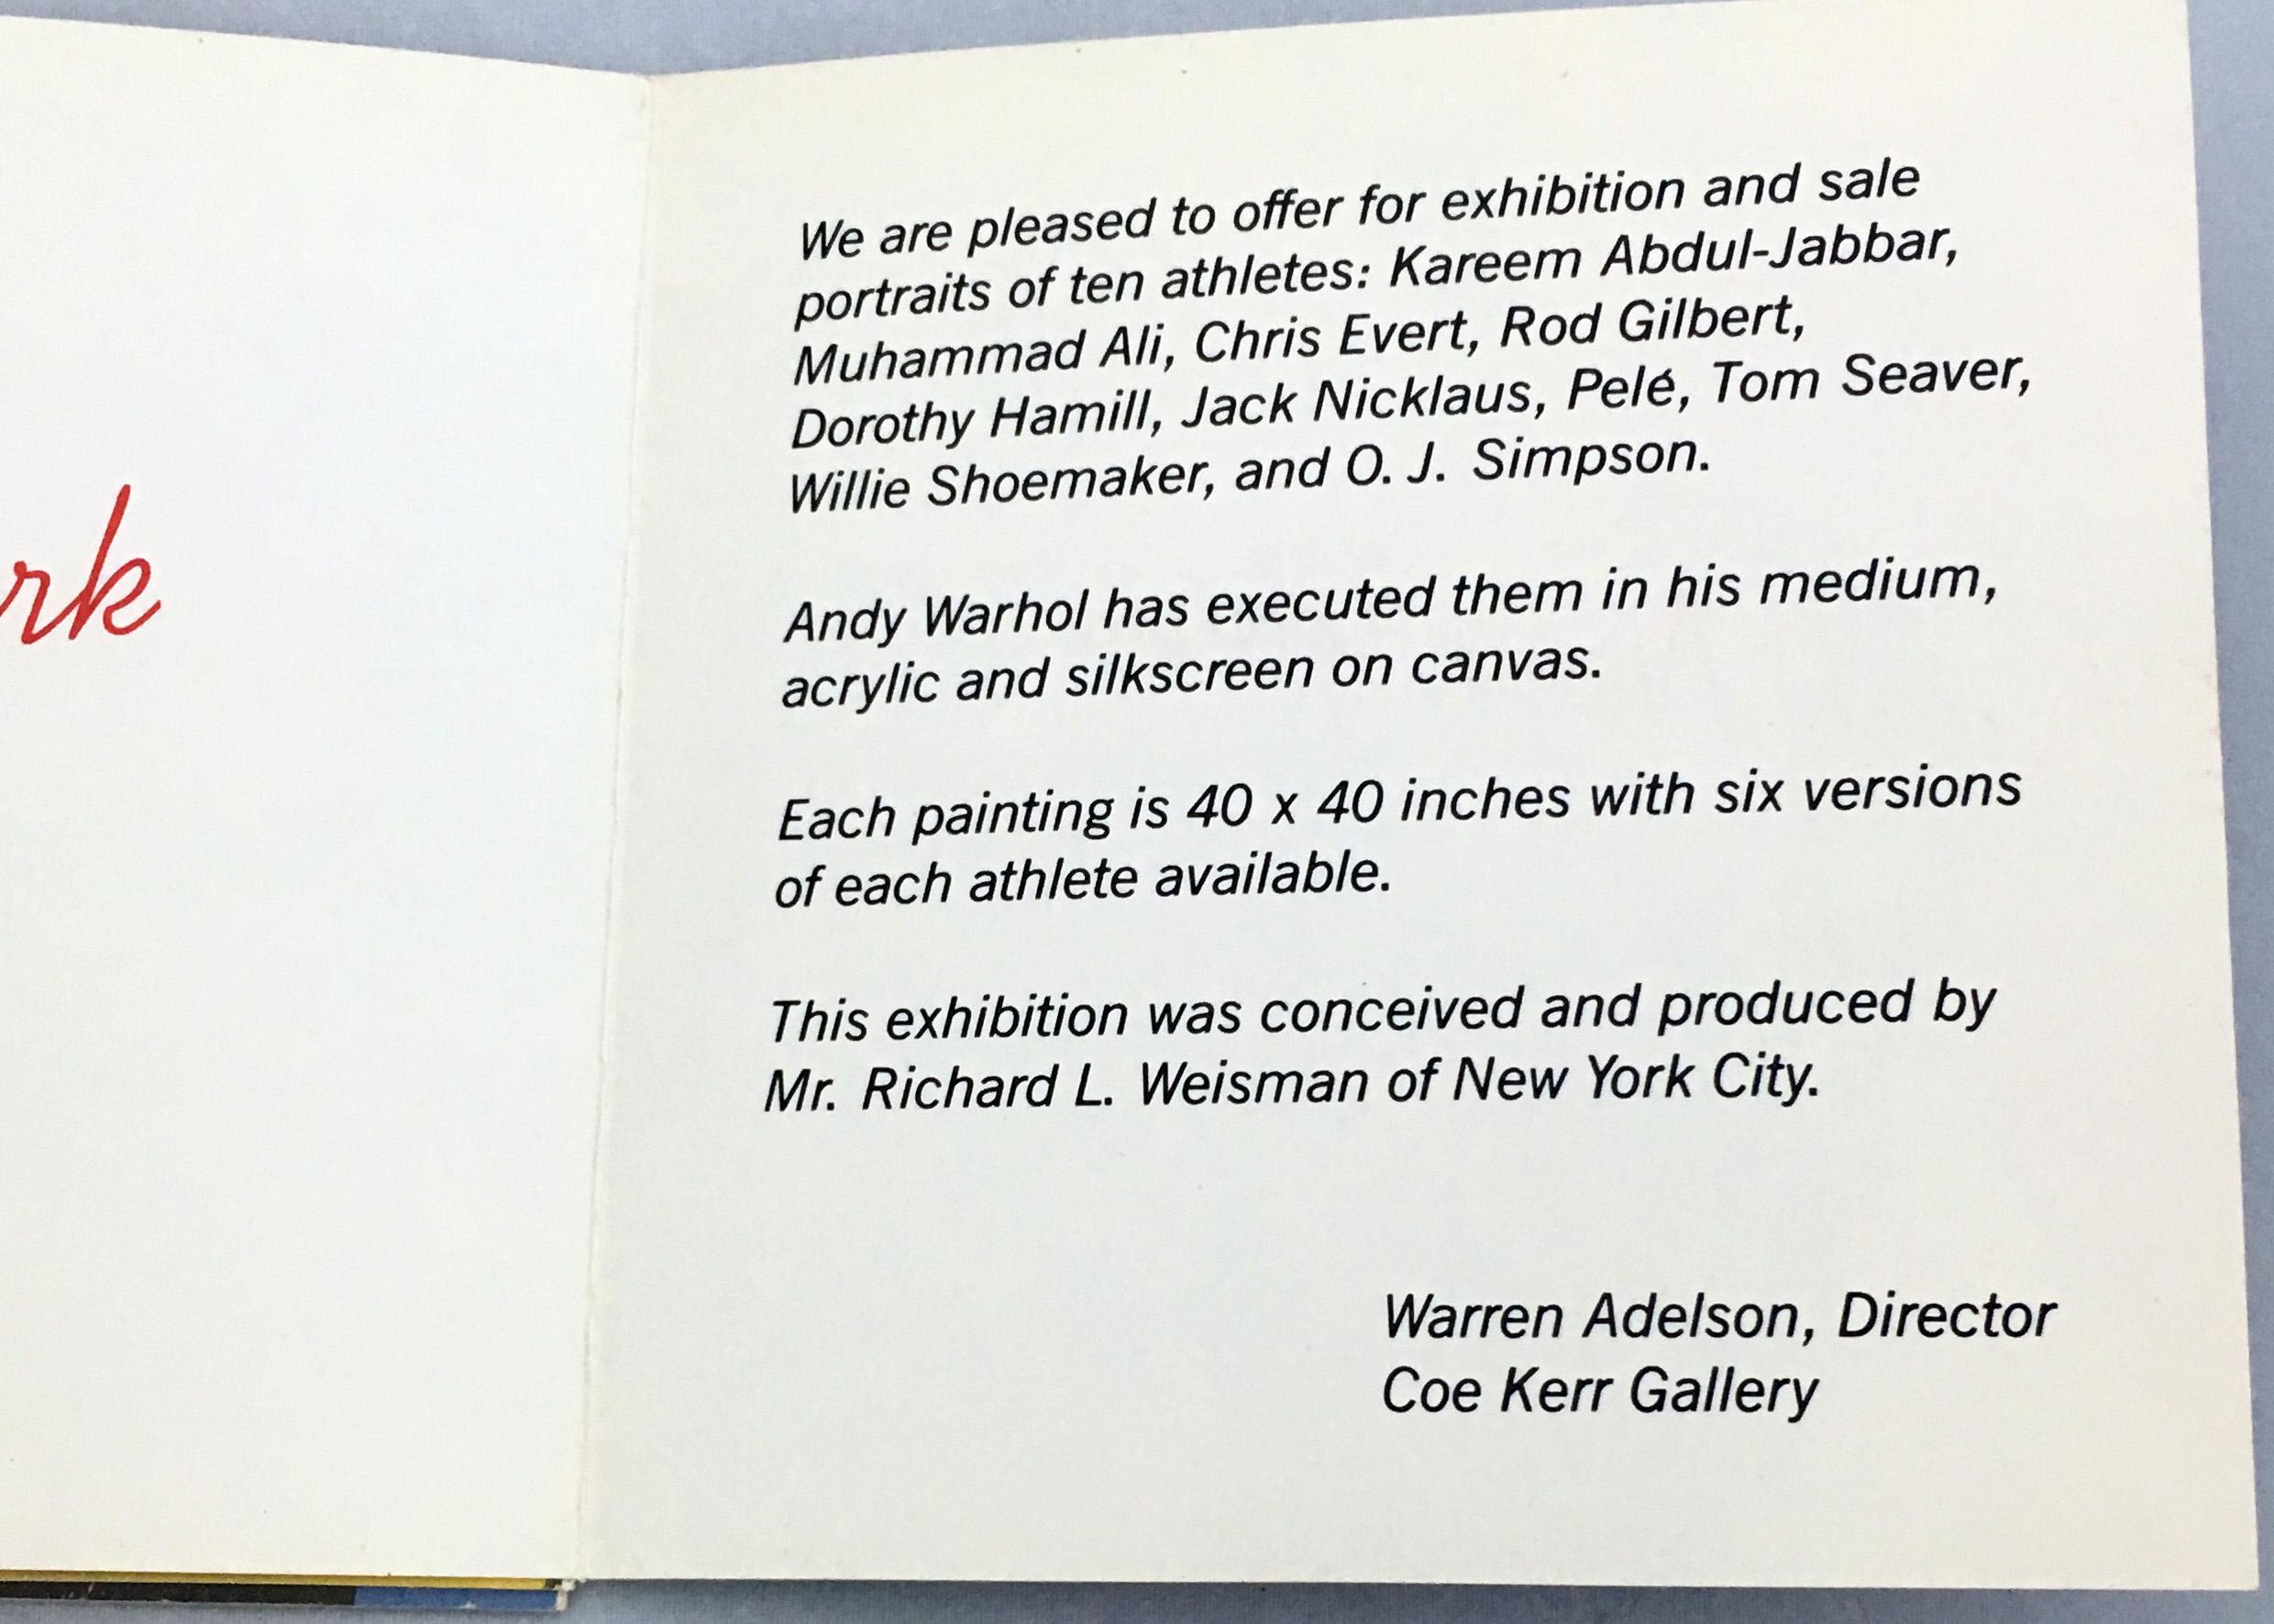 Andy Warhol's Athletes: rare vintage gallery announcement
Original 1978 fold-out announcement to advertise Andy Warhol's Athletes at Coe Kerr Gallery, NY: December 9, 1977 - January, 1978.  Opens according style to 27 inches wide to reveal 6 Warhol